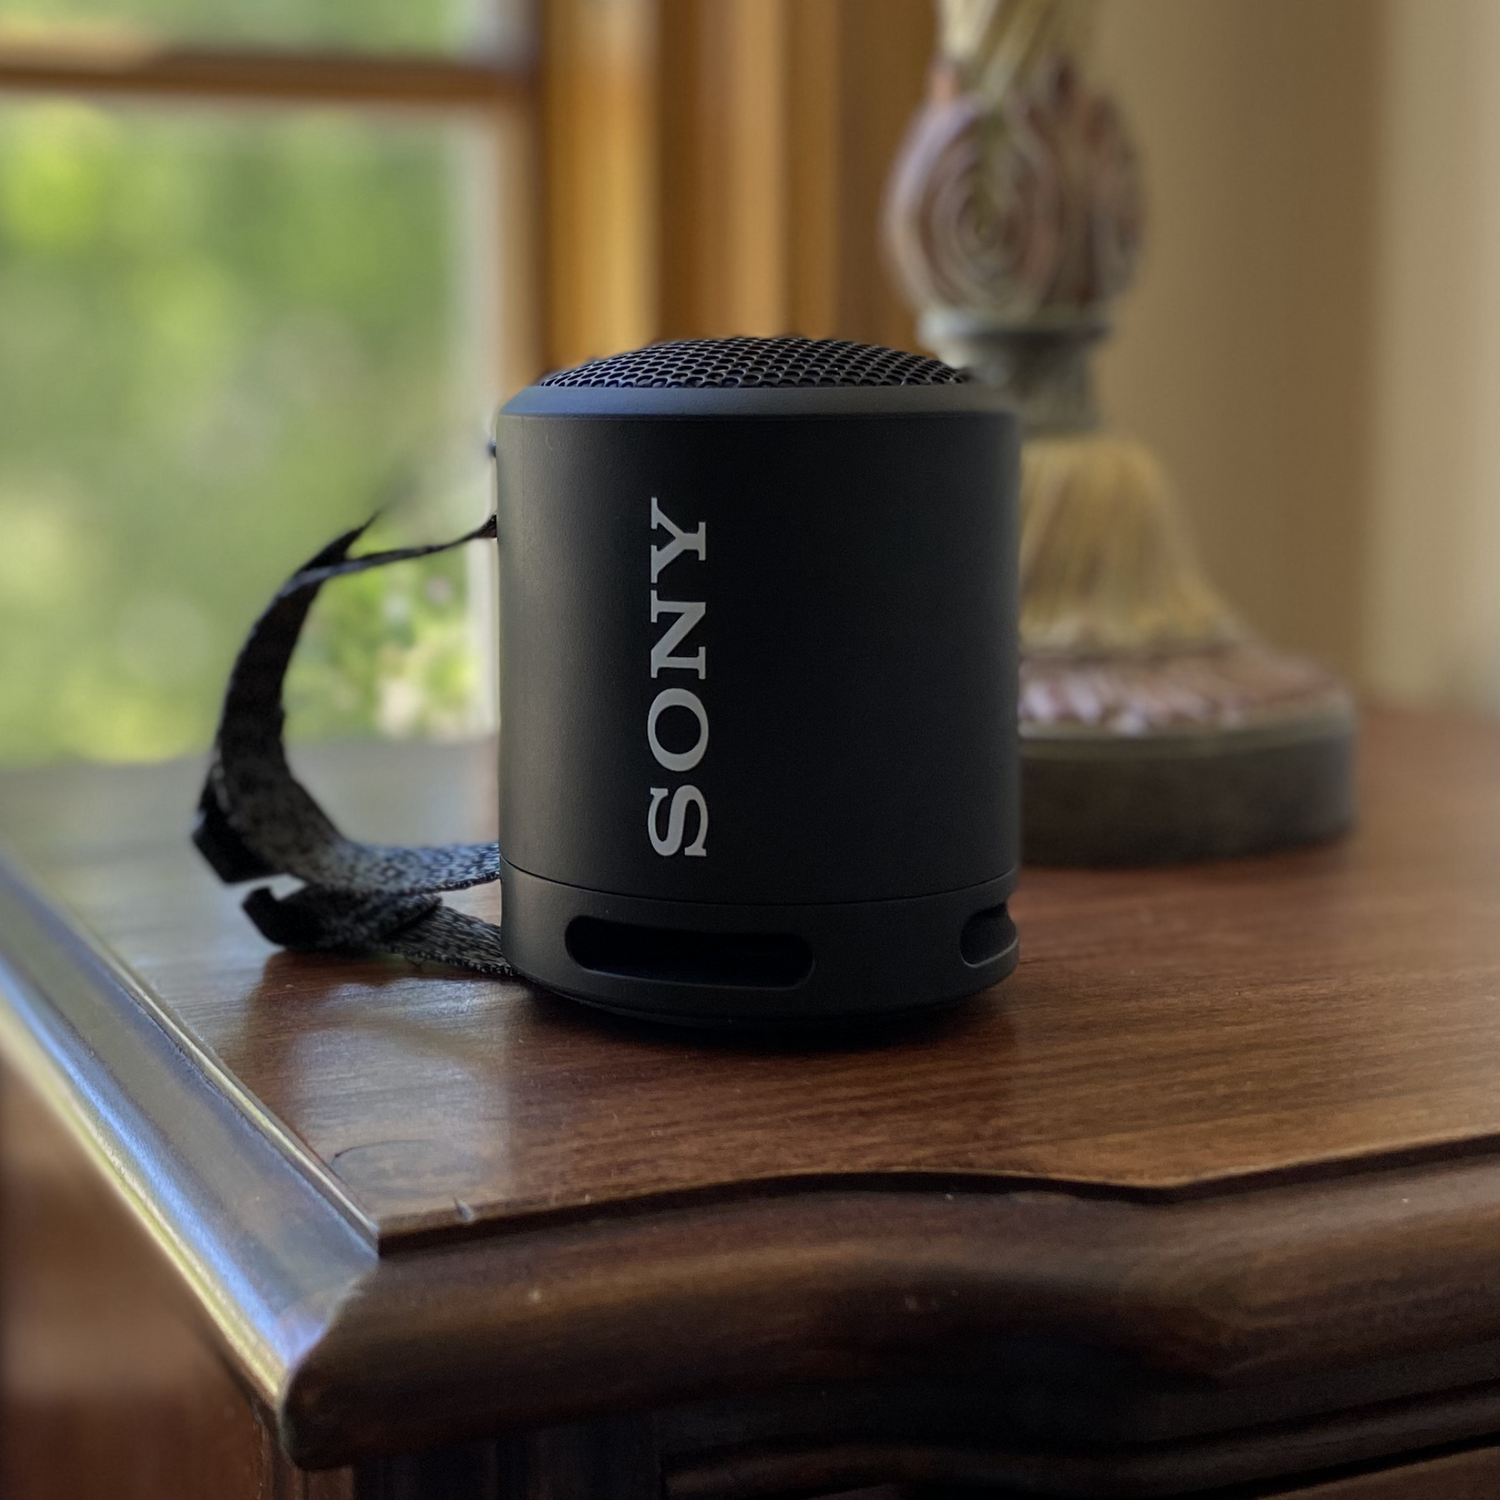 Why These Sony Bluetooth Speakers Are the Best When It Comes to Music?